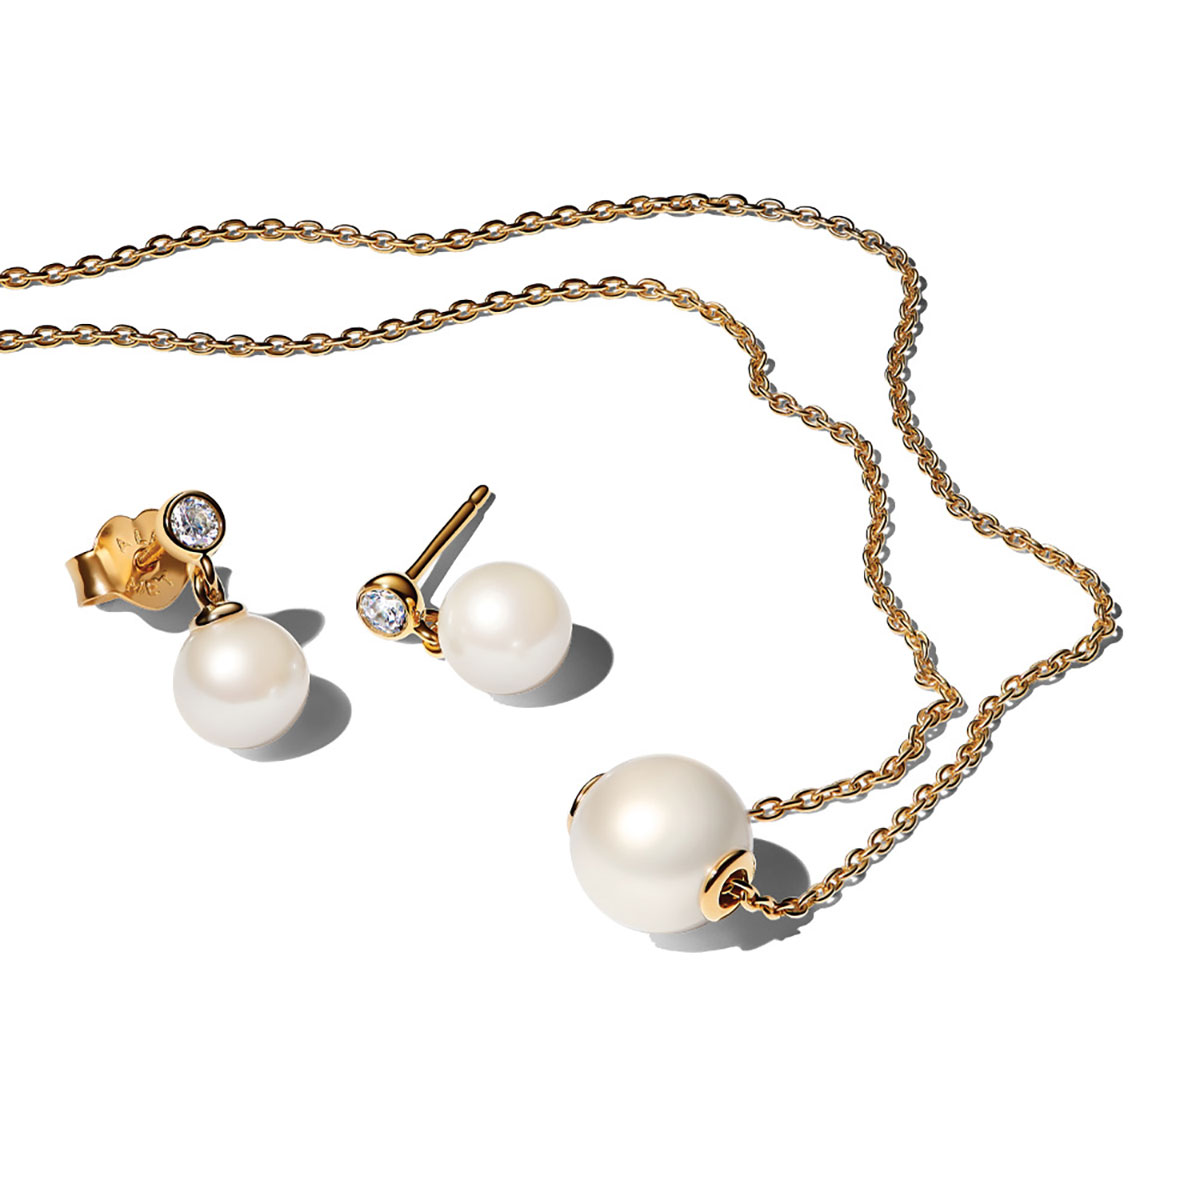 Treated Freshwater Cultured Pearl Jewelry Gift Set